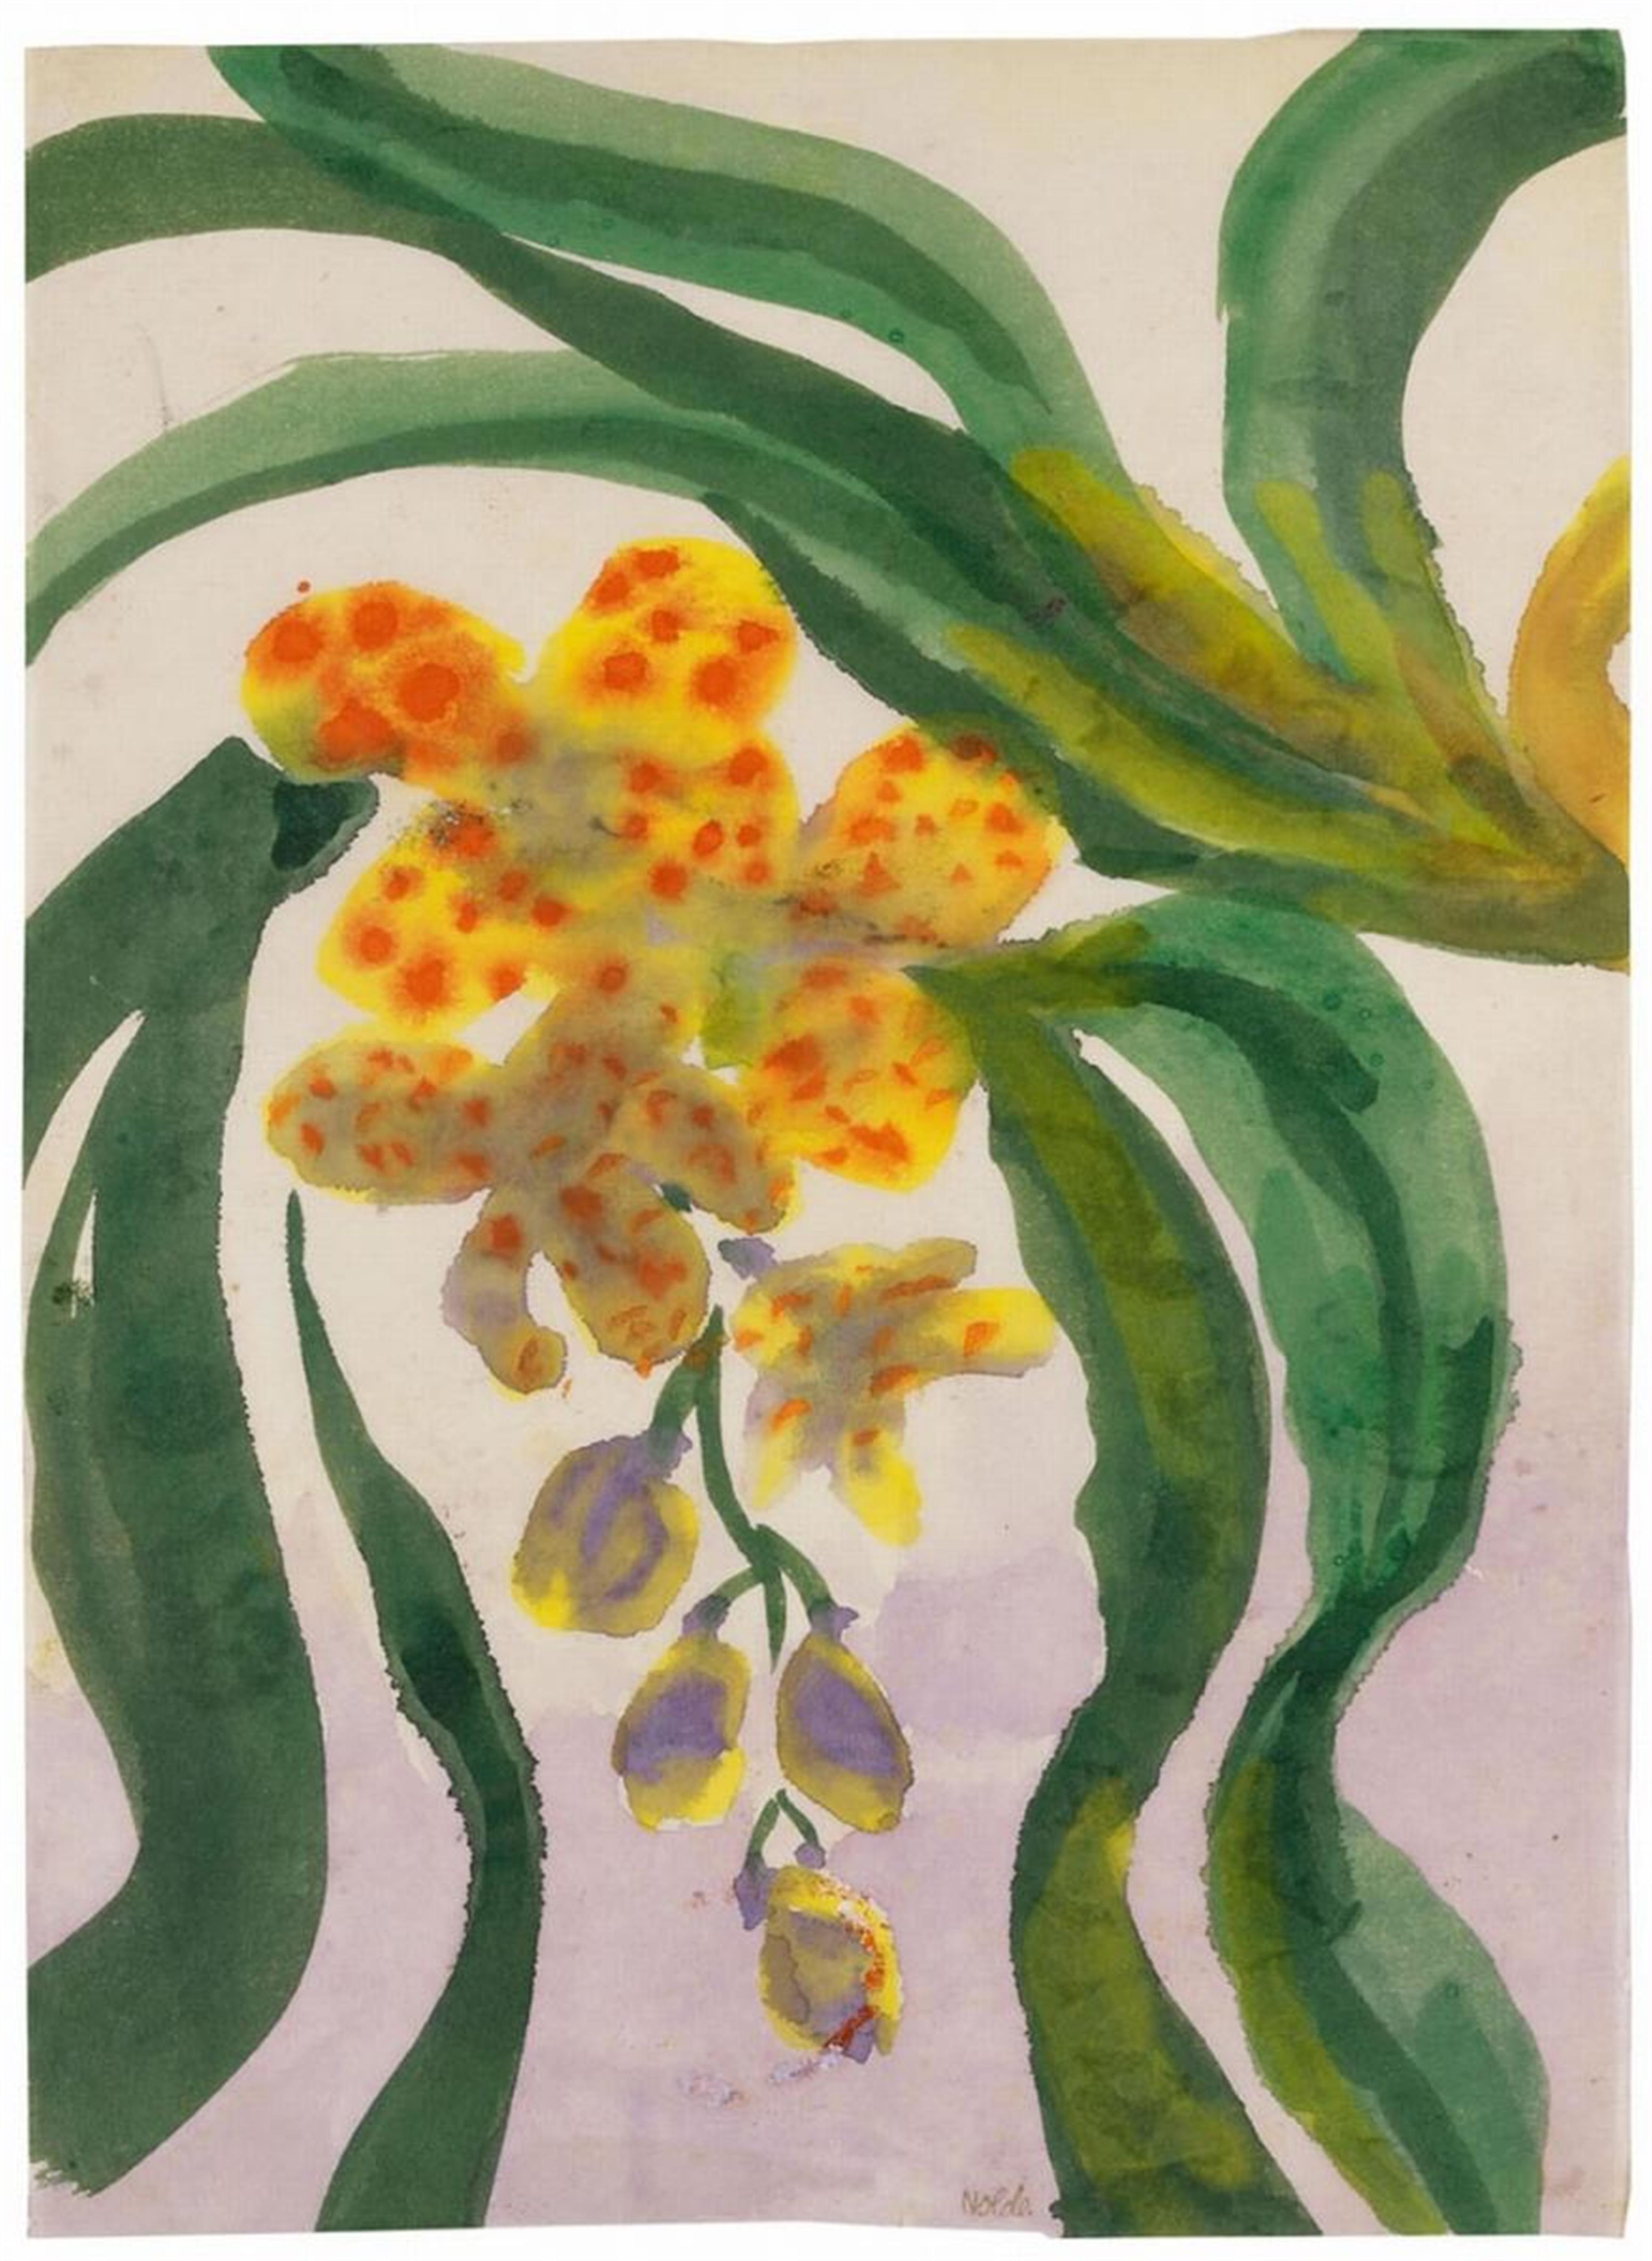 Emil Nolde - Orchidee (Orchid) - image-1